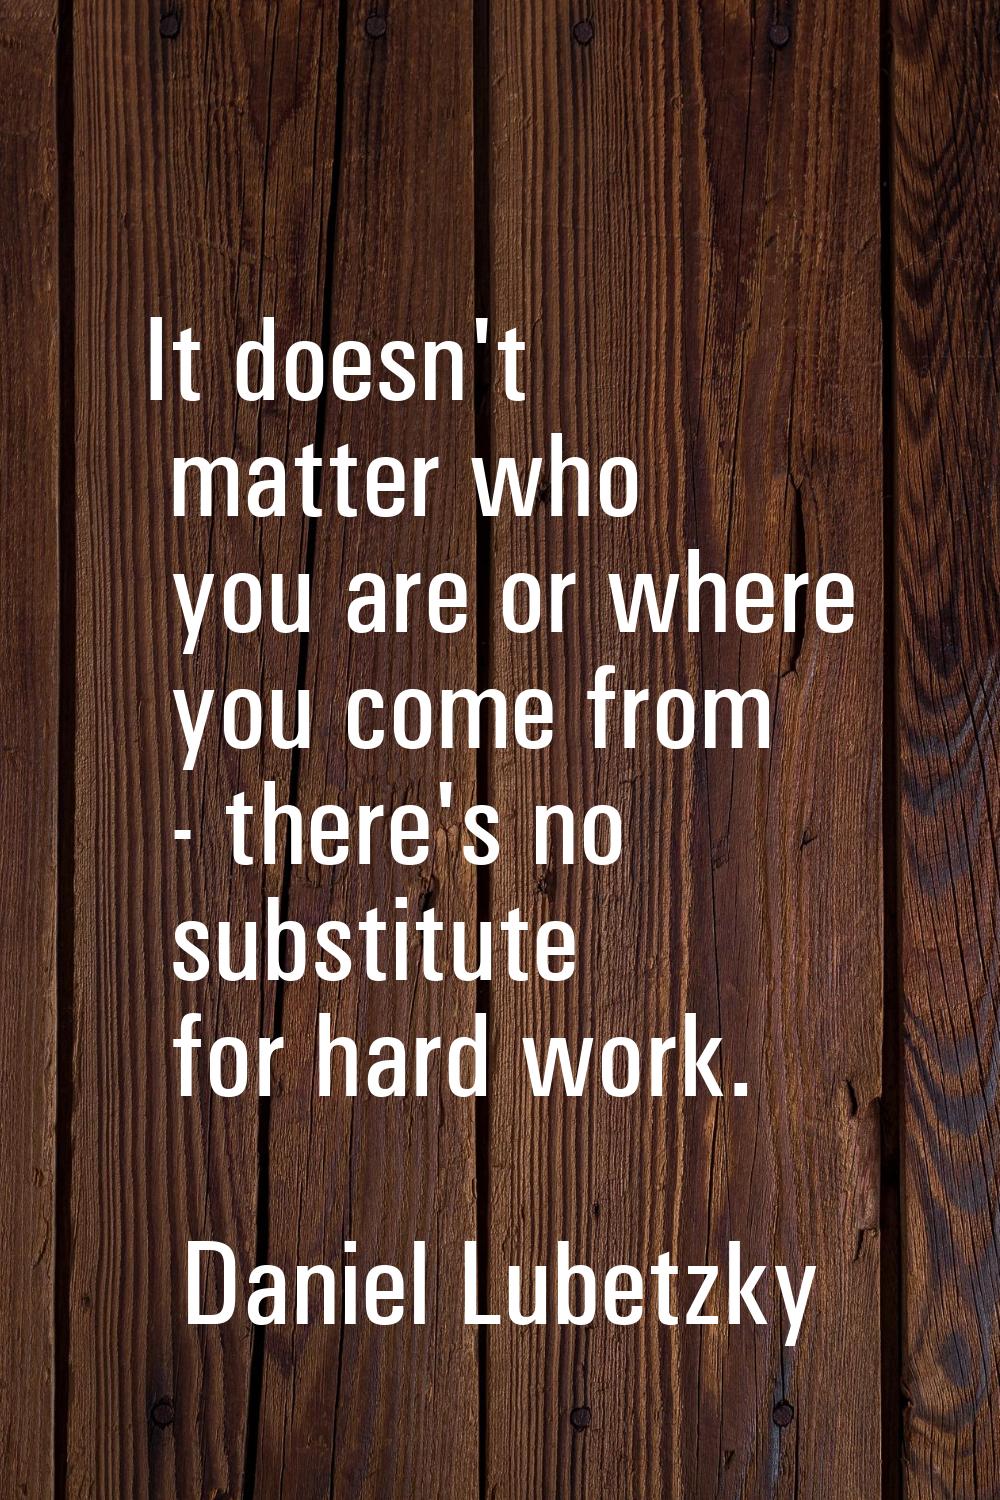 It doesn't matter who you are or where you come from - there's no substitute for hard work.